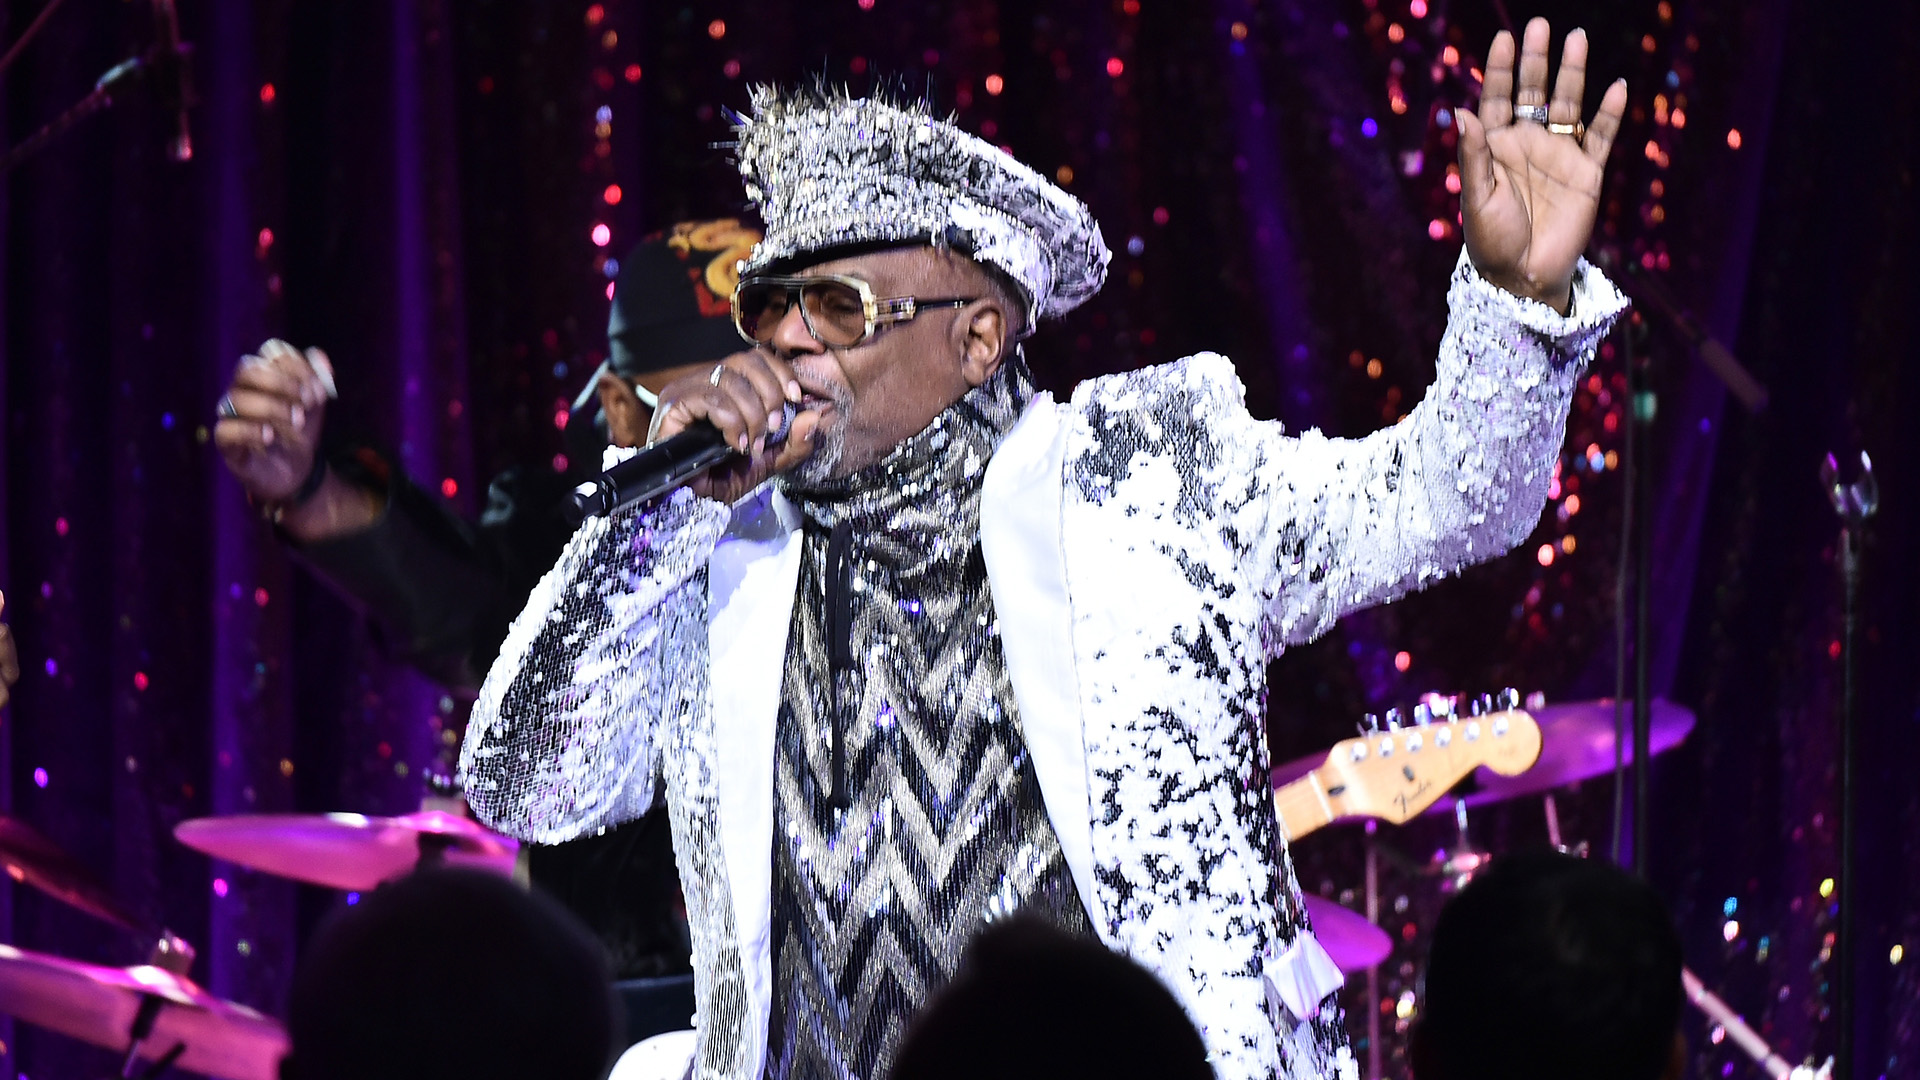 George Clinton performs at the 2017 SESAC Pop Awards on April 13, 2017 in New York City.